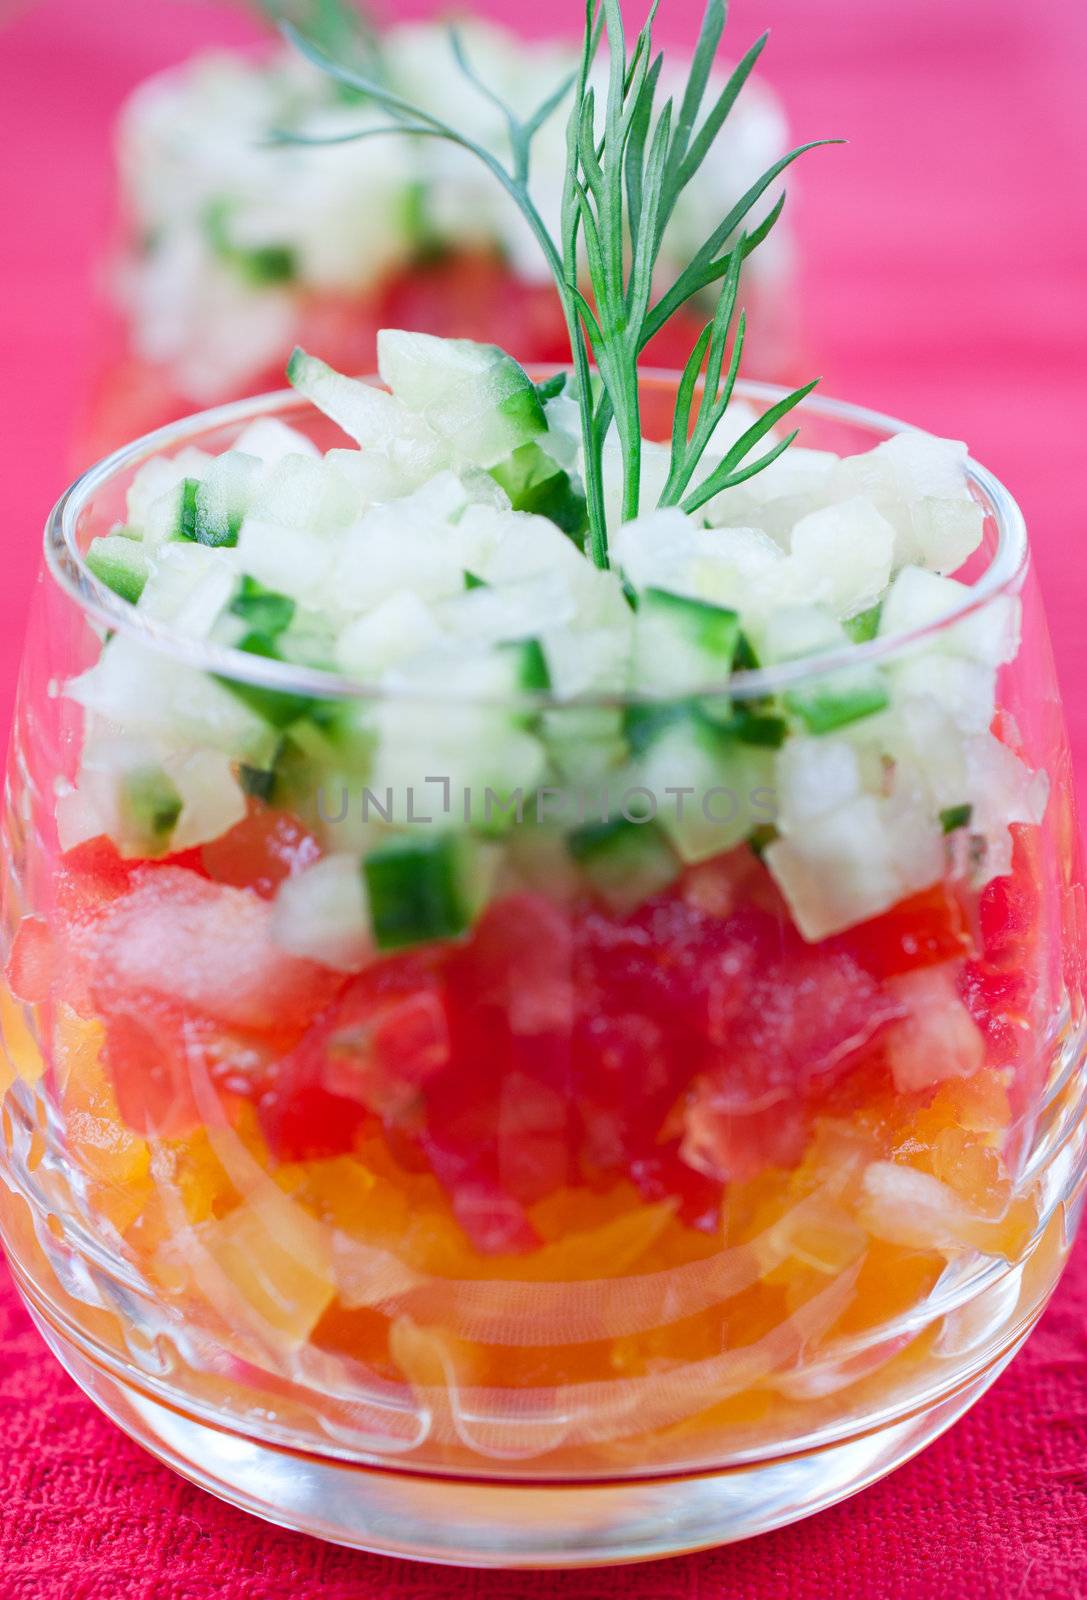 Vegetable salad in a glass close up